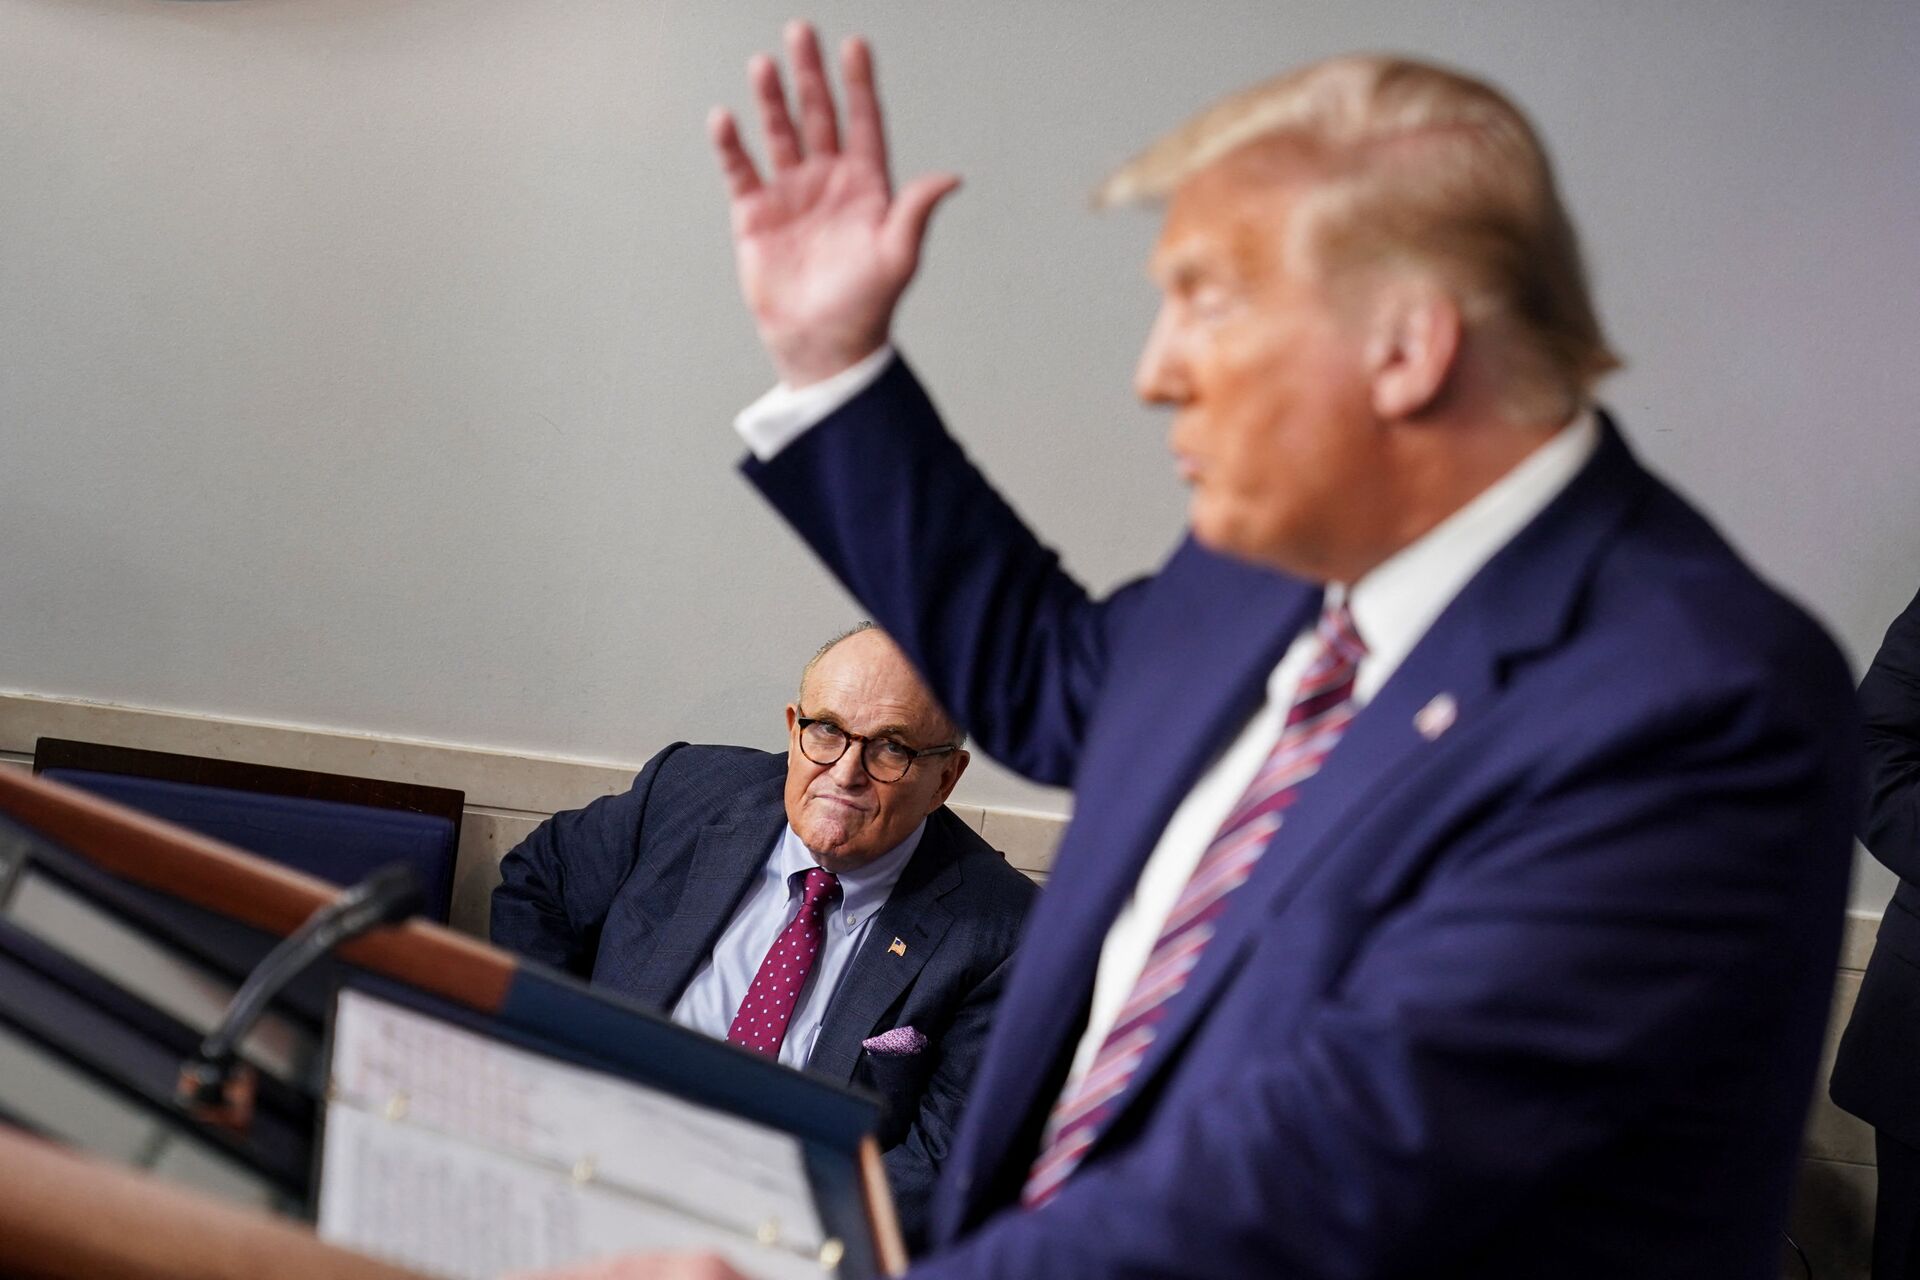 Former New York Mayor Rudy Giuliani listens as U.S. President Donald Trump speaks during a news conference in the Briefing Room of the White House on September 27, 2020 in Washington, DC. - Sputnik International, 1920, 07.09.2021